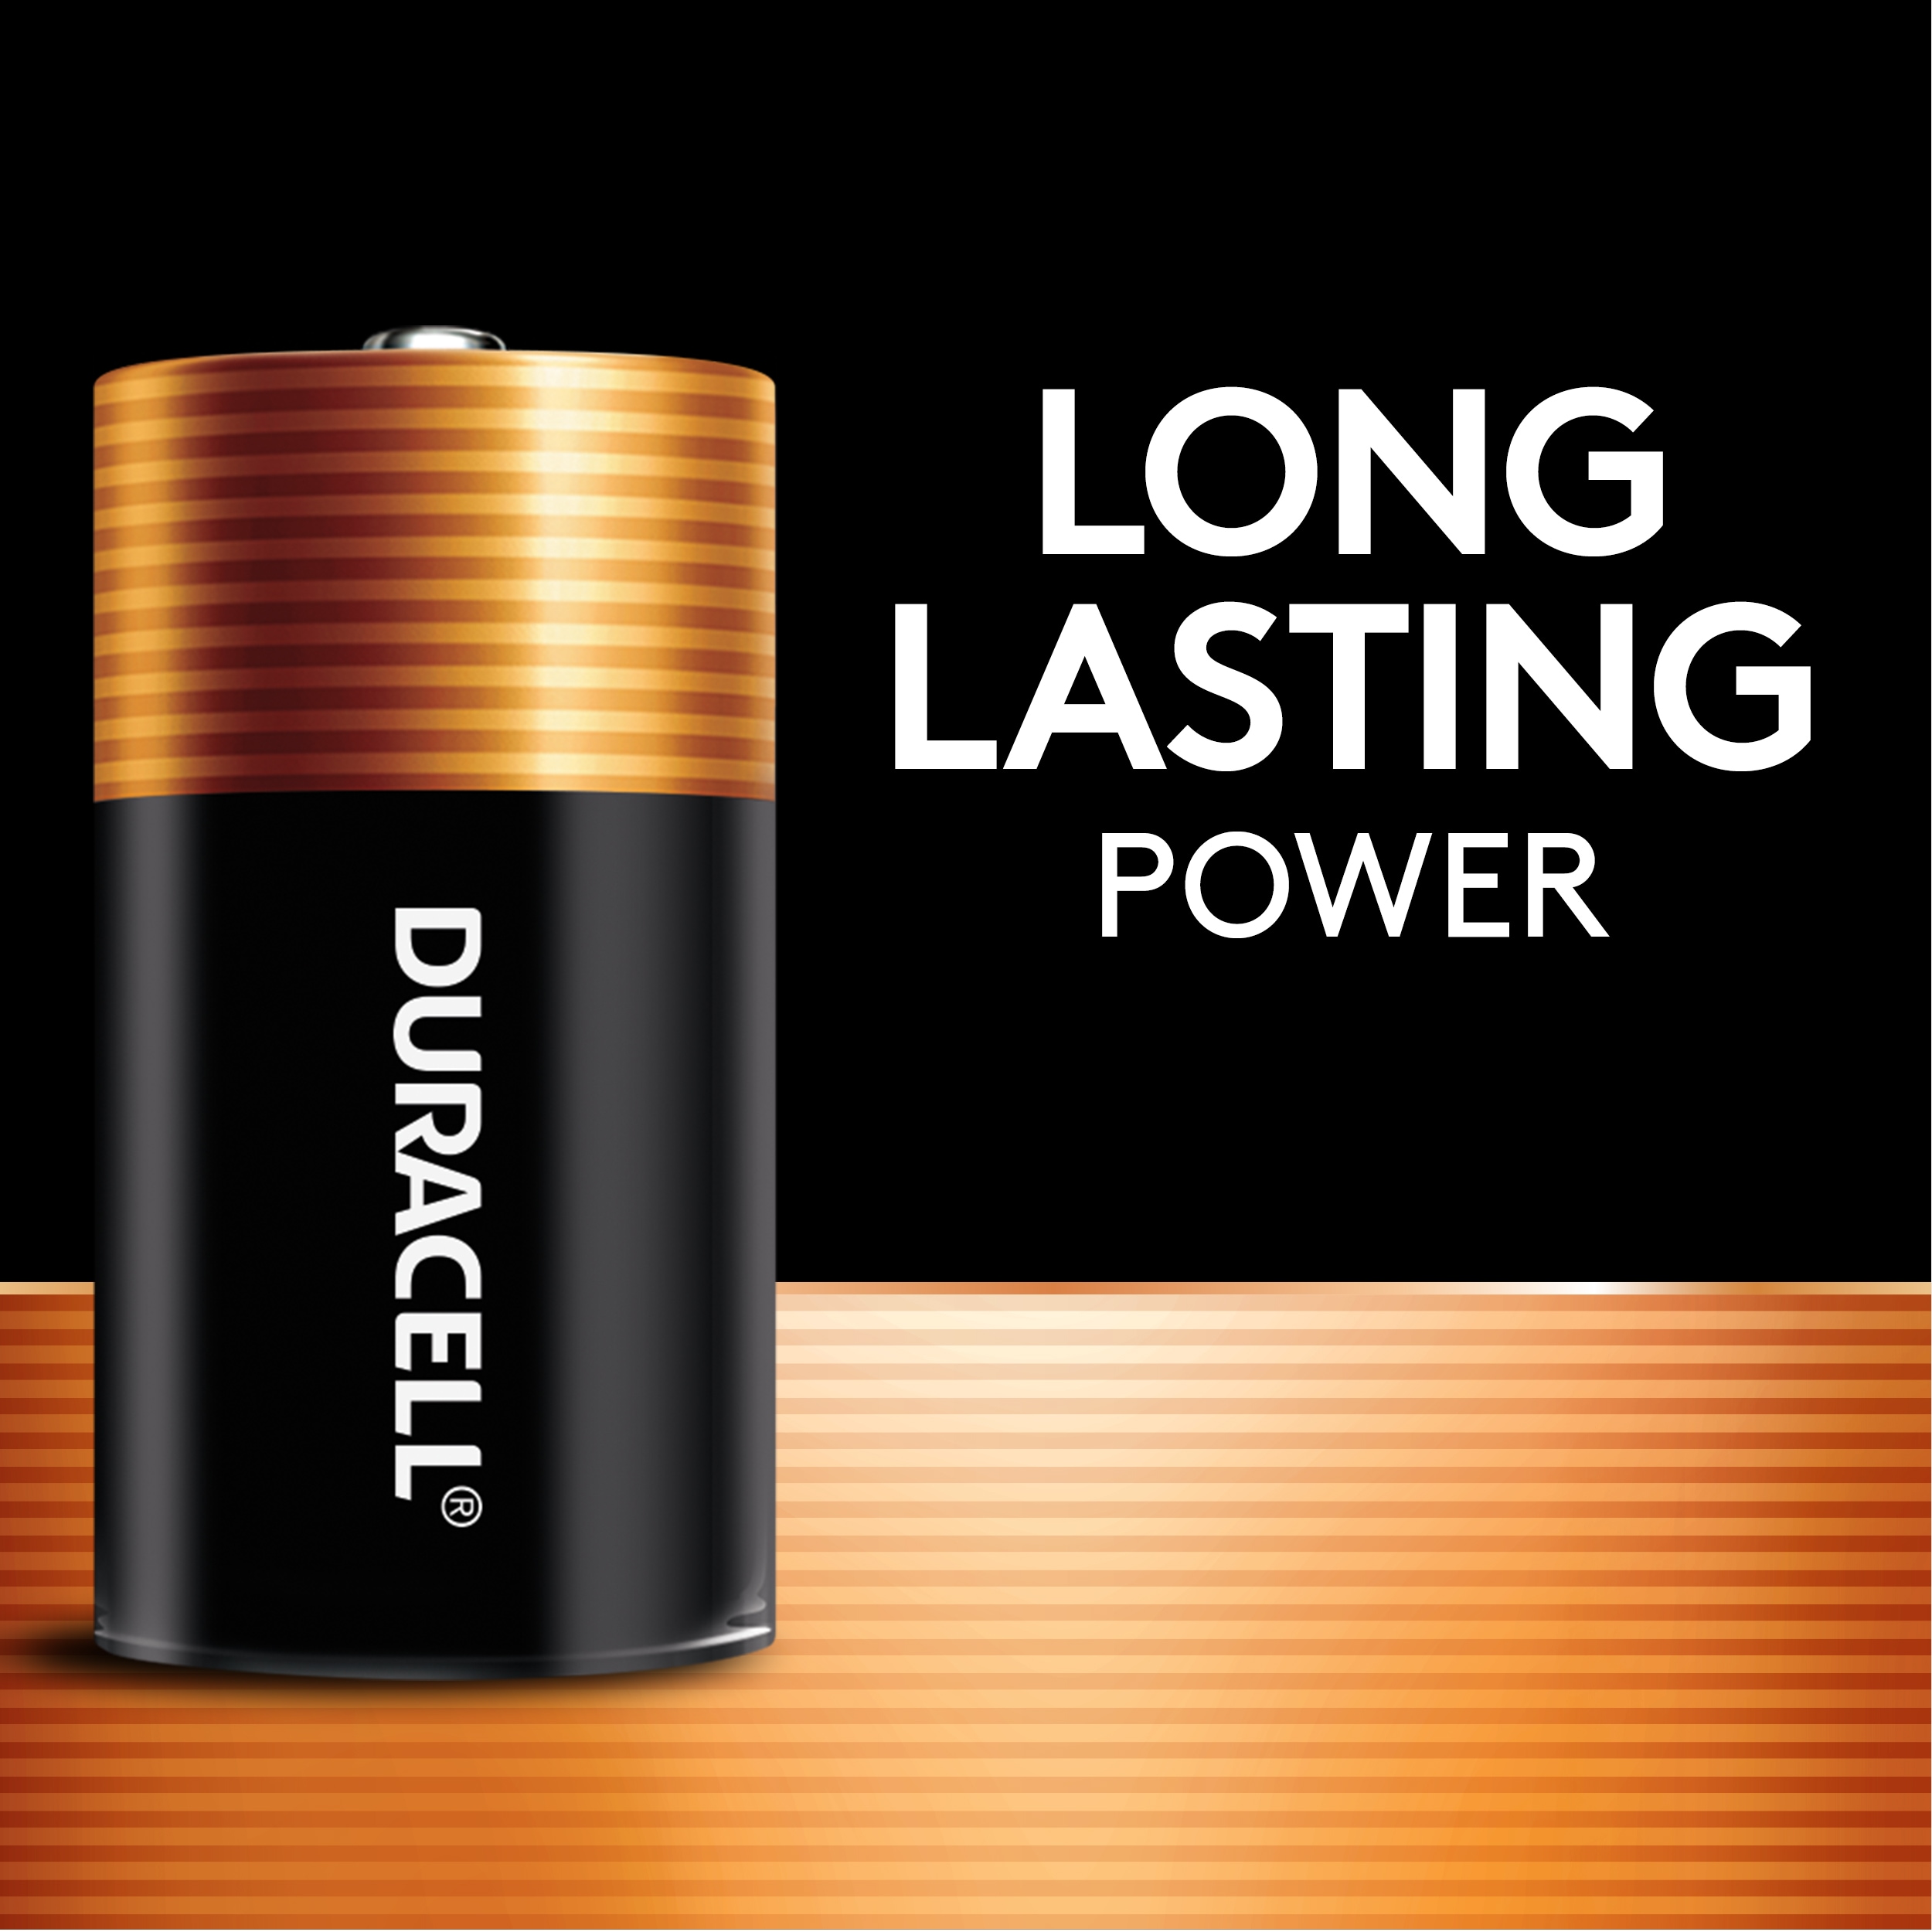 8ct Duracell Coppertop AAA : Home & Office fast delivery by App or Online